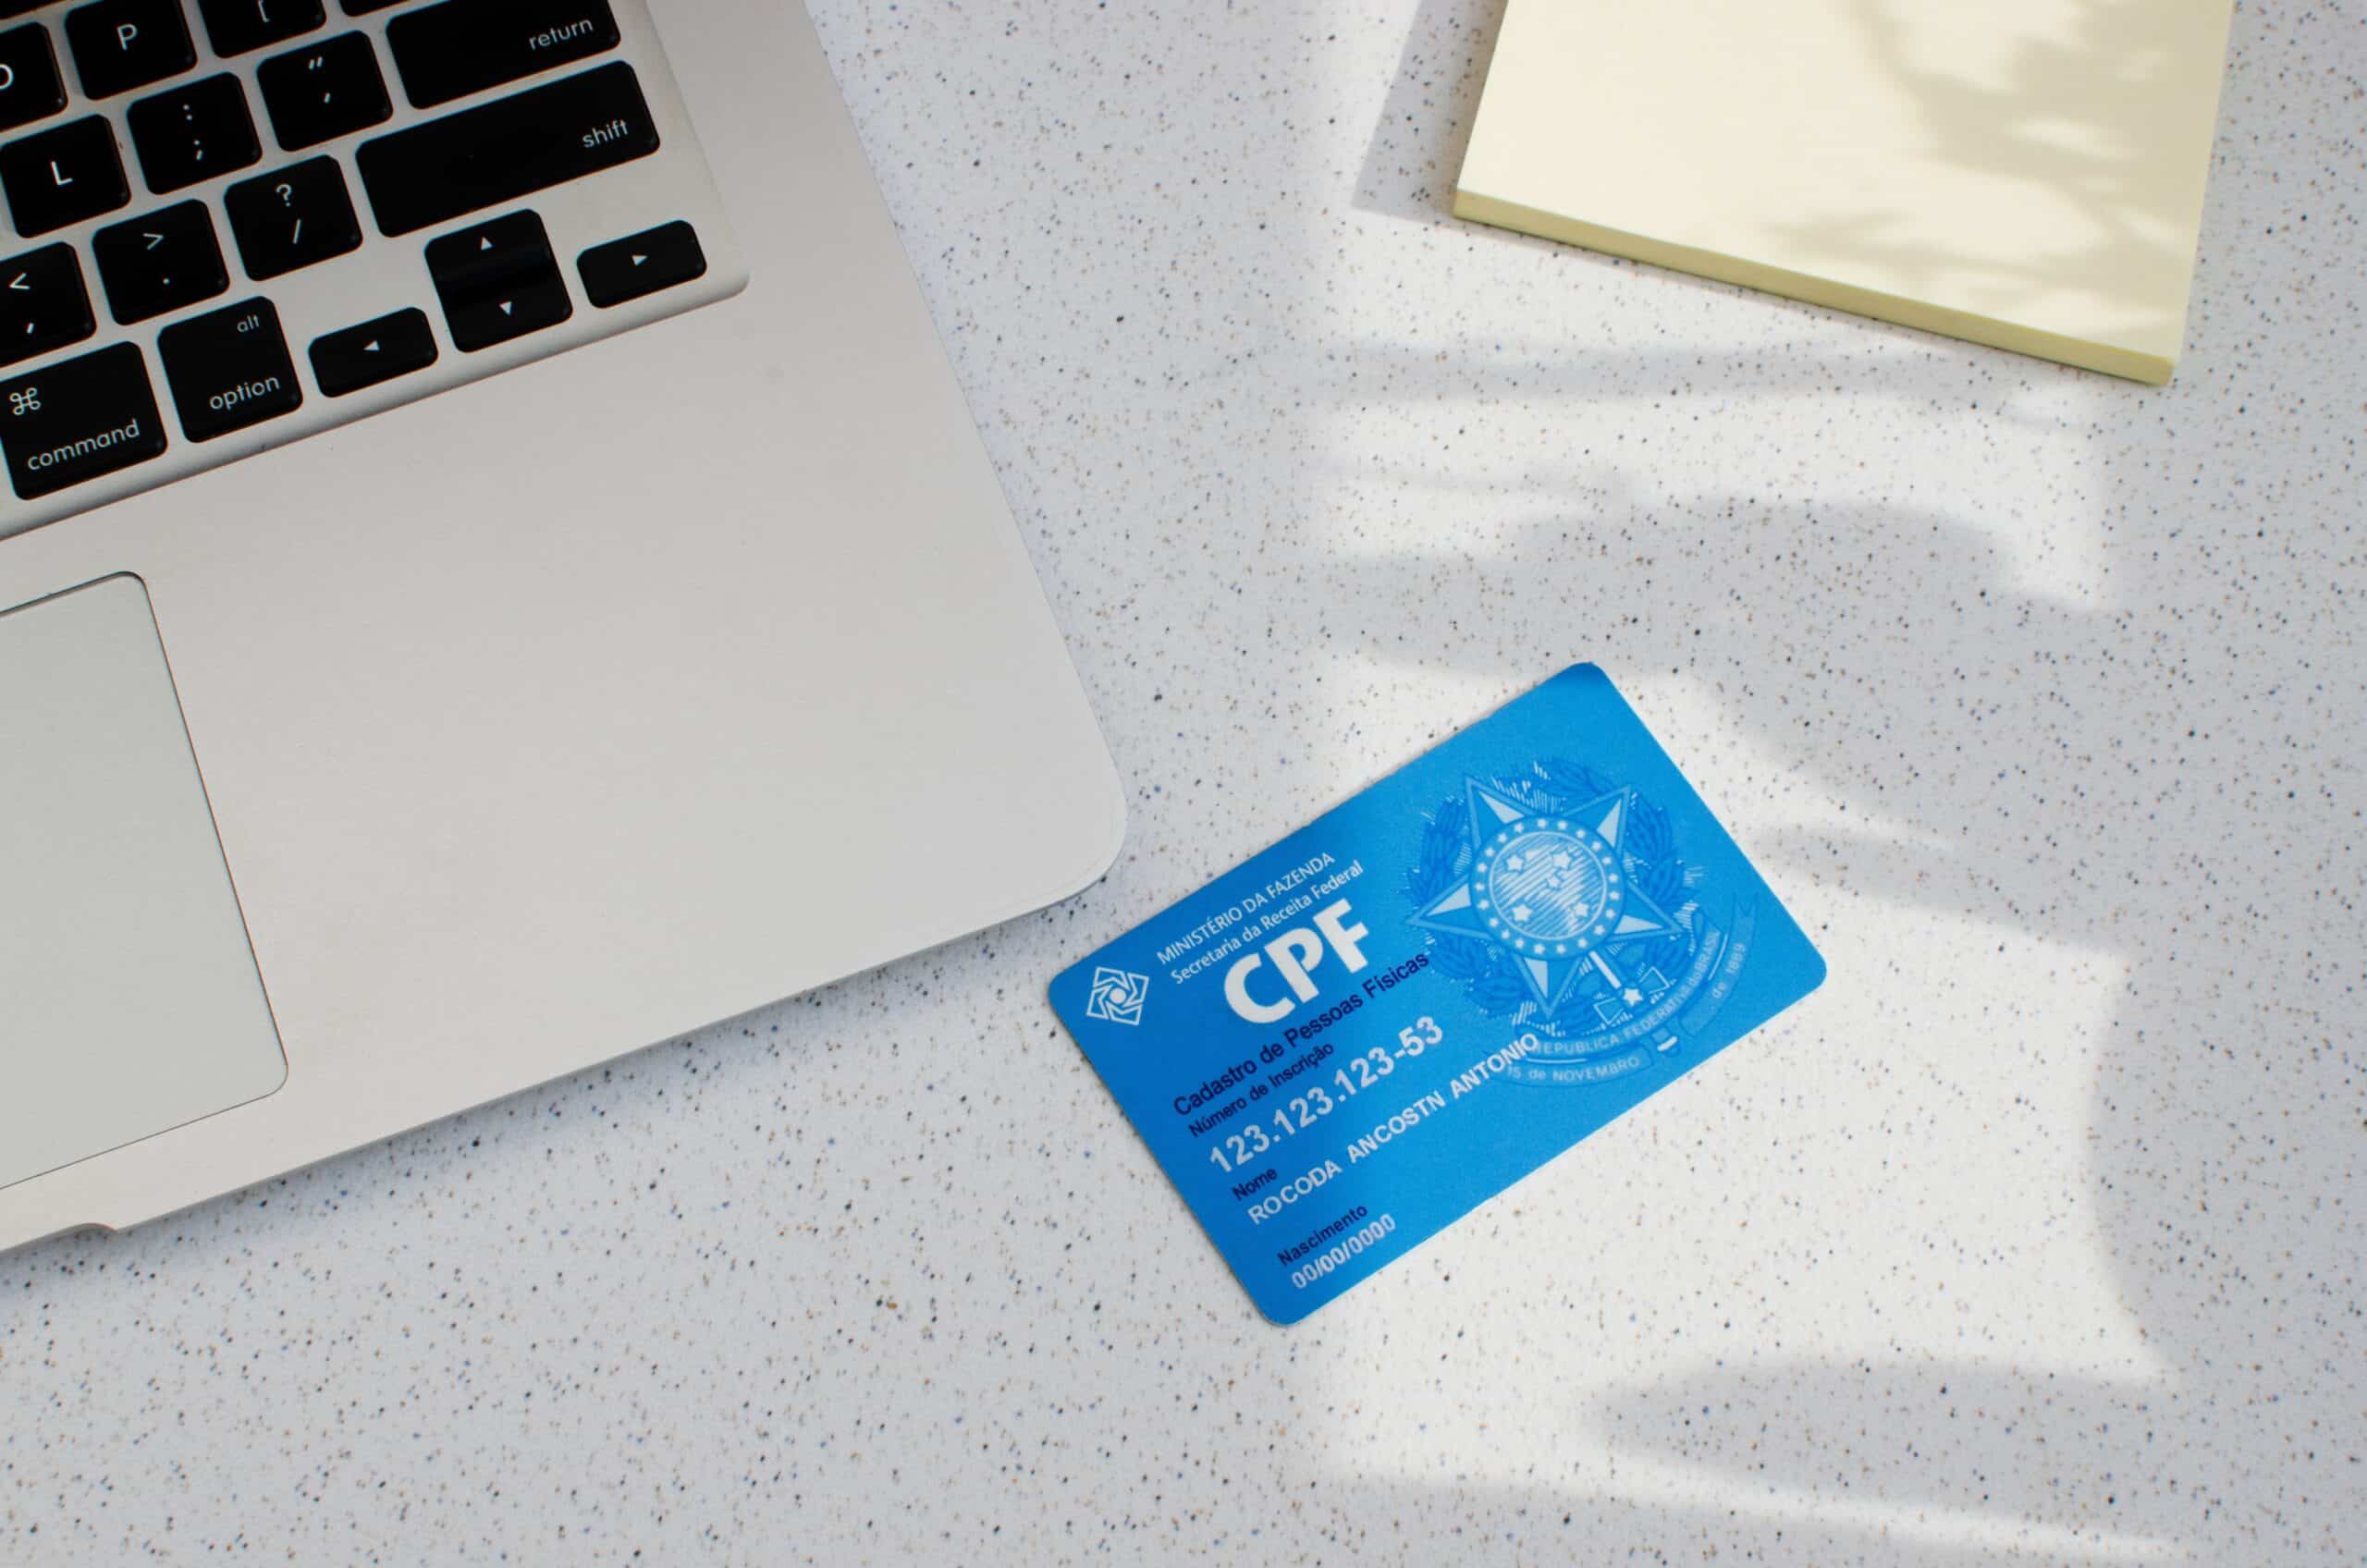 Brazilian,Cpf,In,Blue,Plastic,Card,Format,On,A,Table.